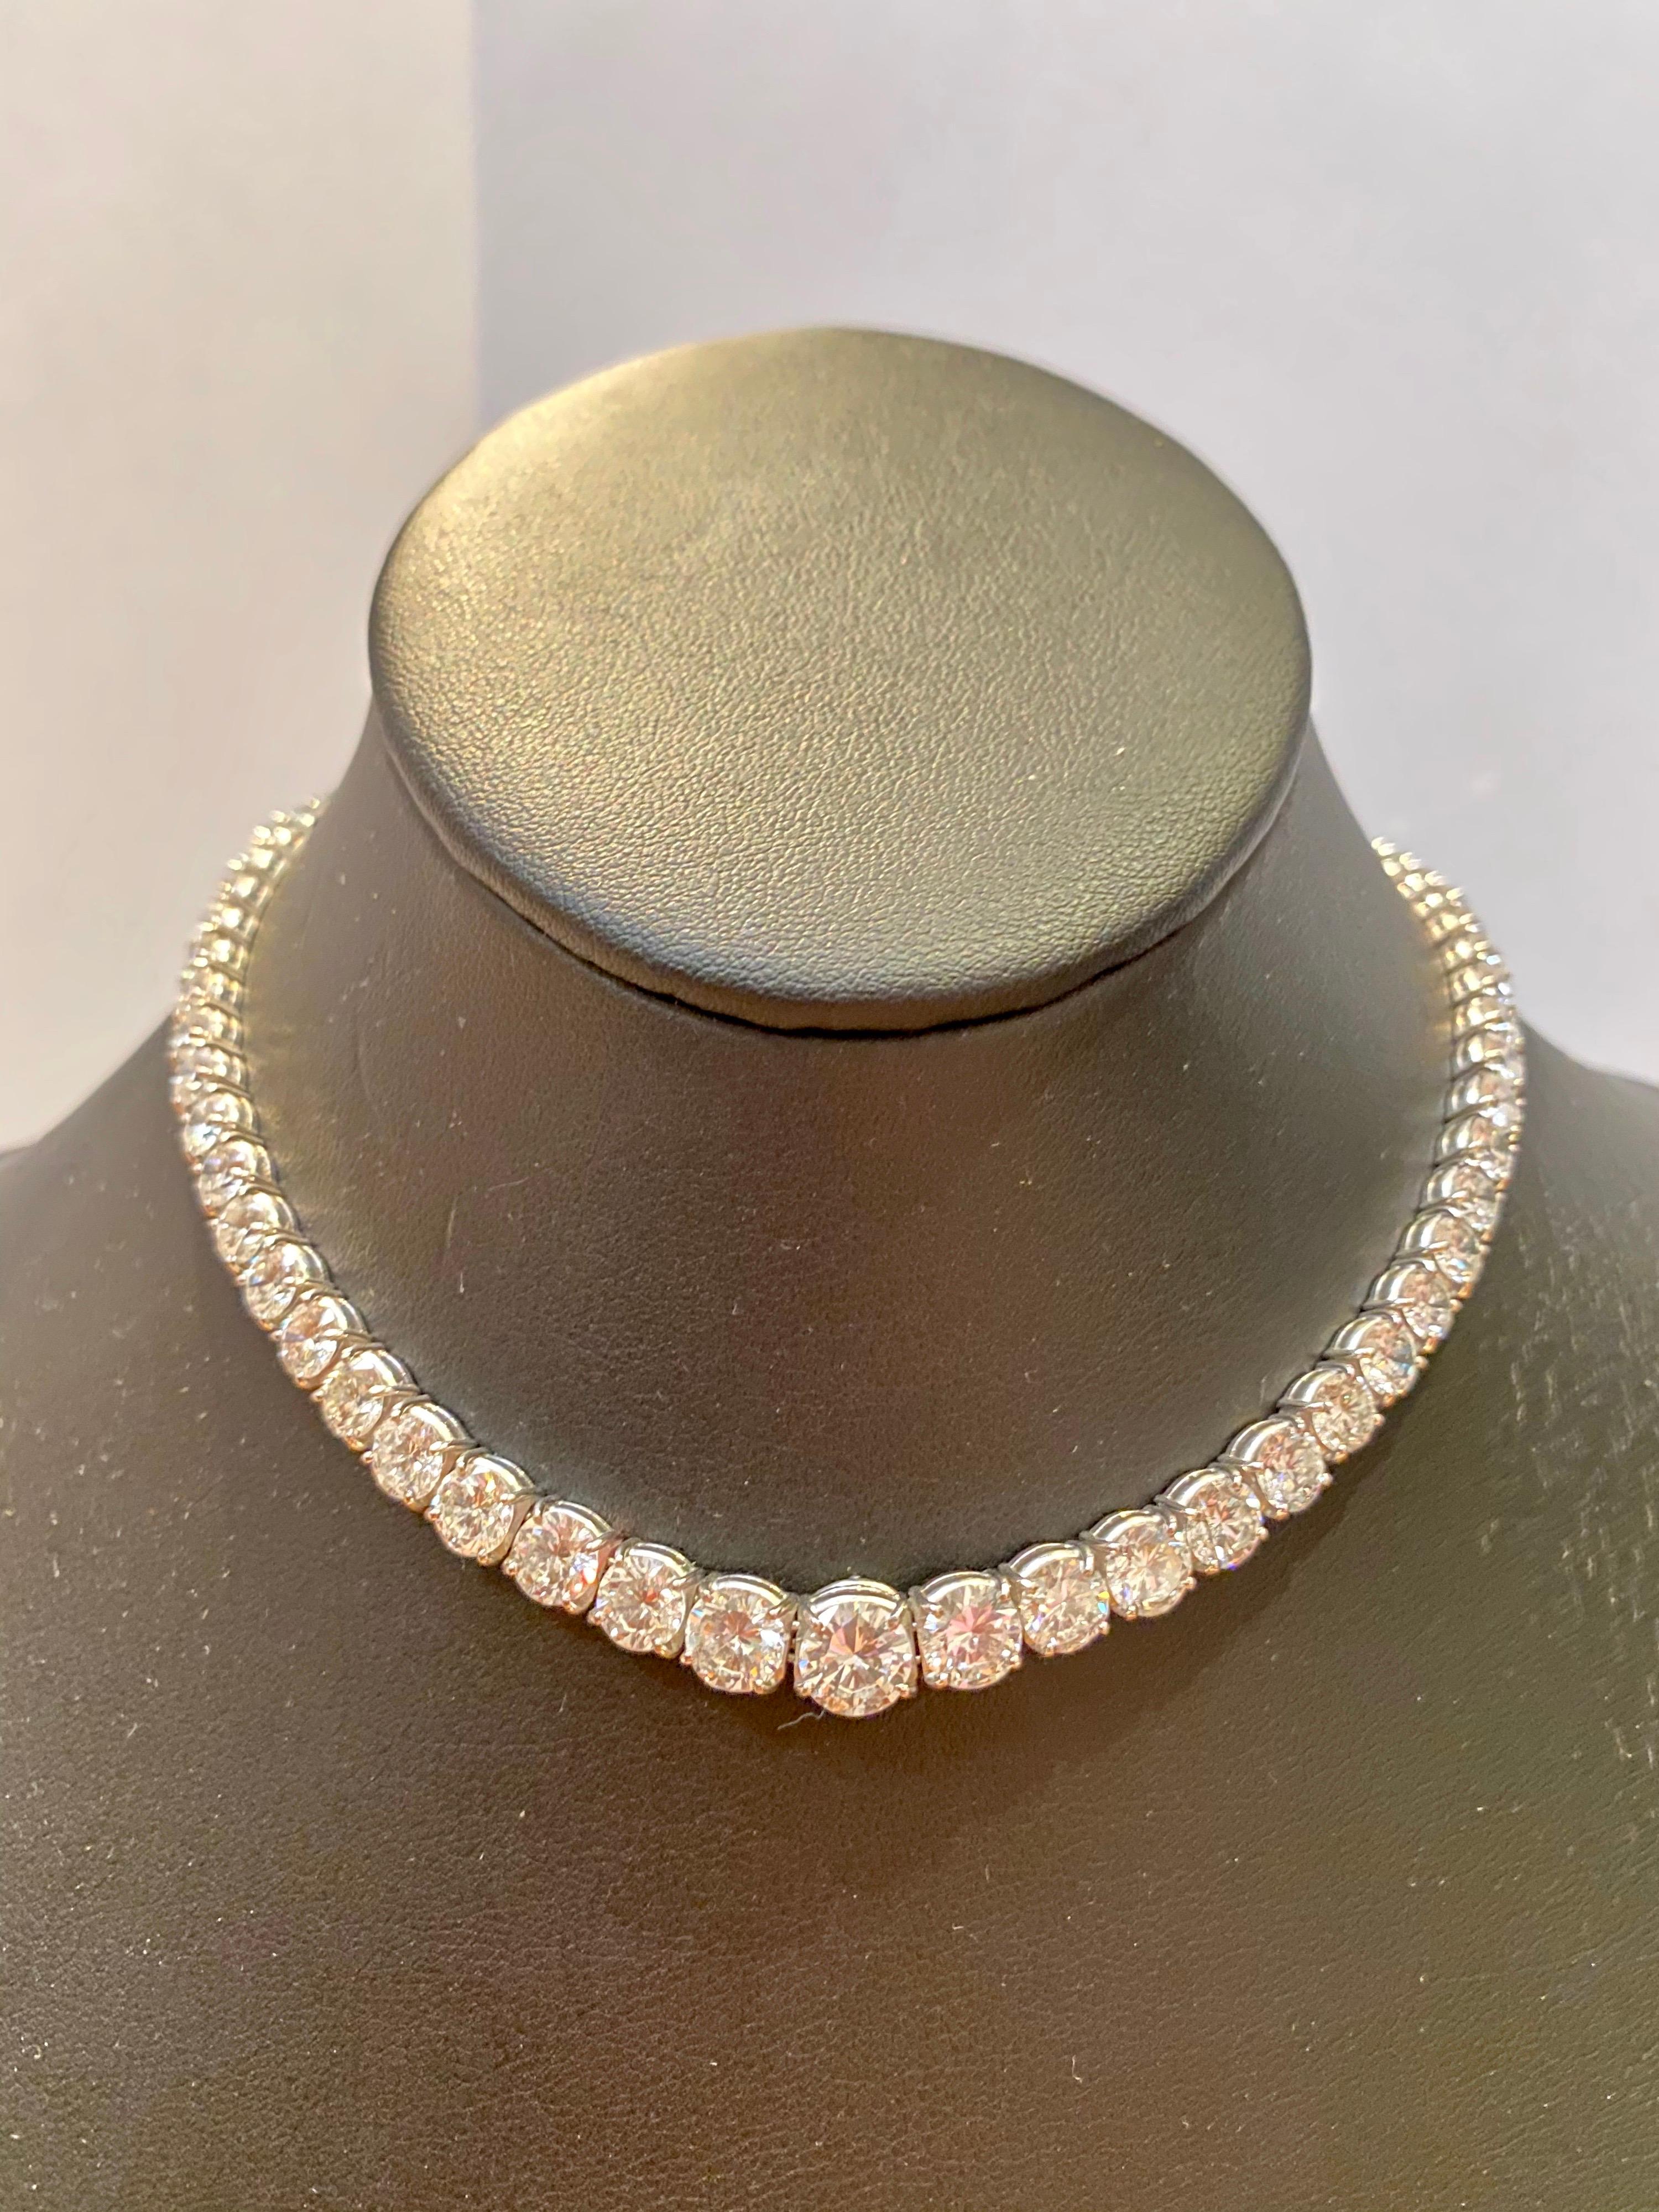 Handmade Platinum Graduated Diamond Necklace set with Round Brilliant Diamonds G color & VS clarity, weighing in total 32.92 carats.

Viewings available in our NYC wholesale office by appointment.
Please contact us for more information. 

All items